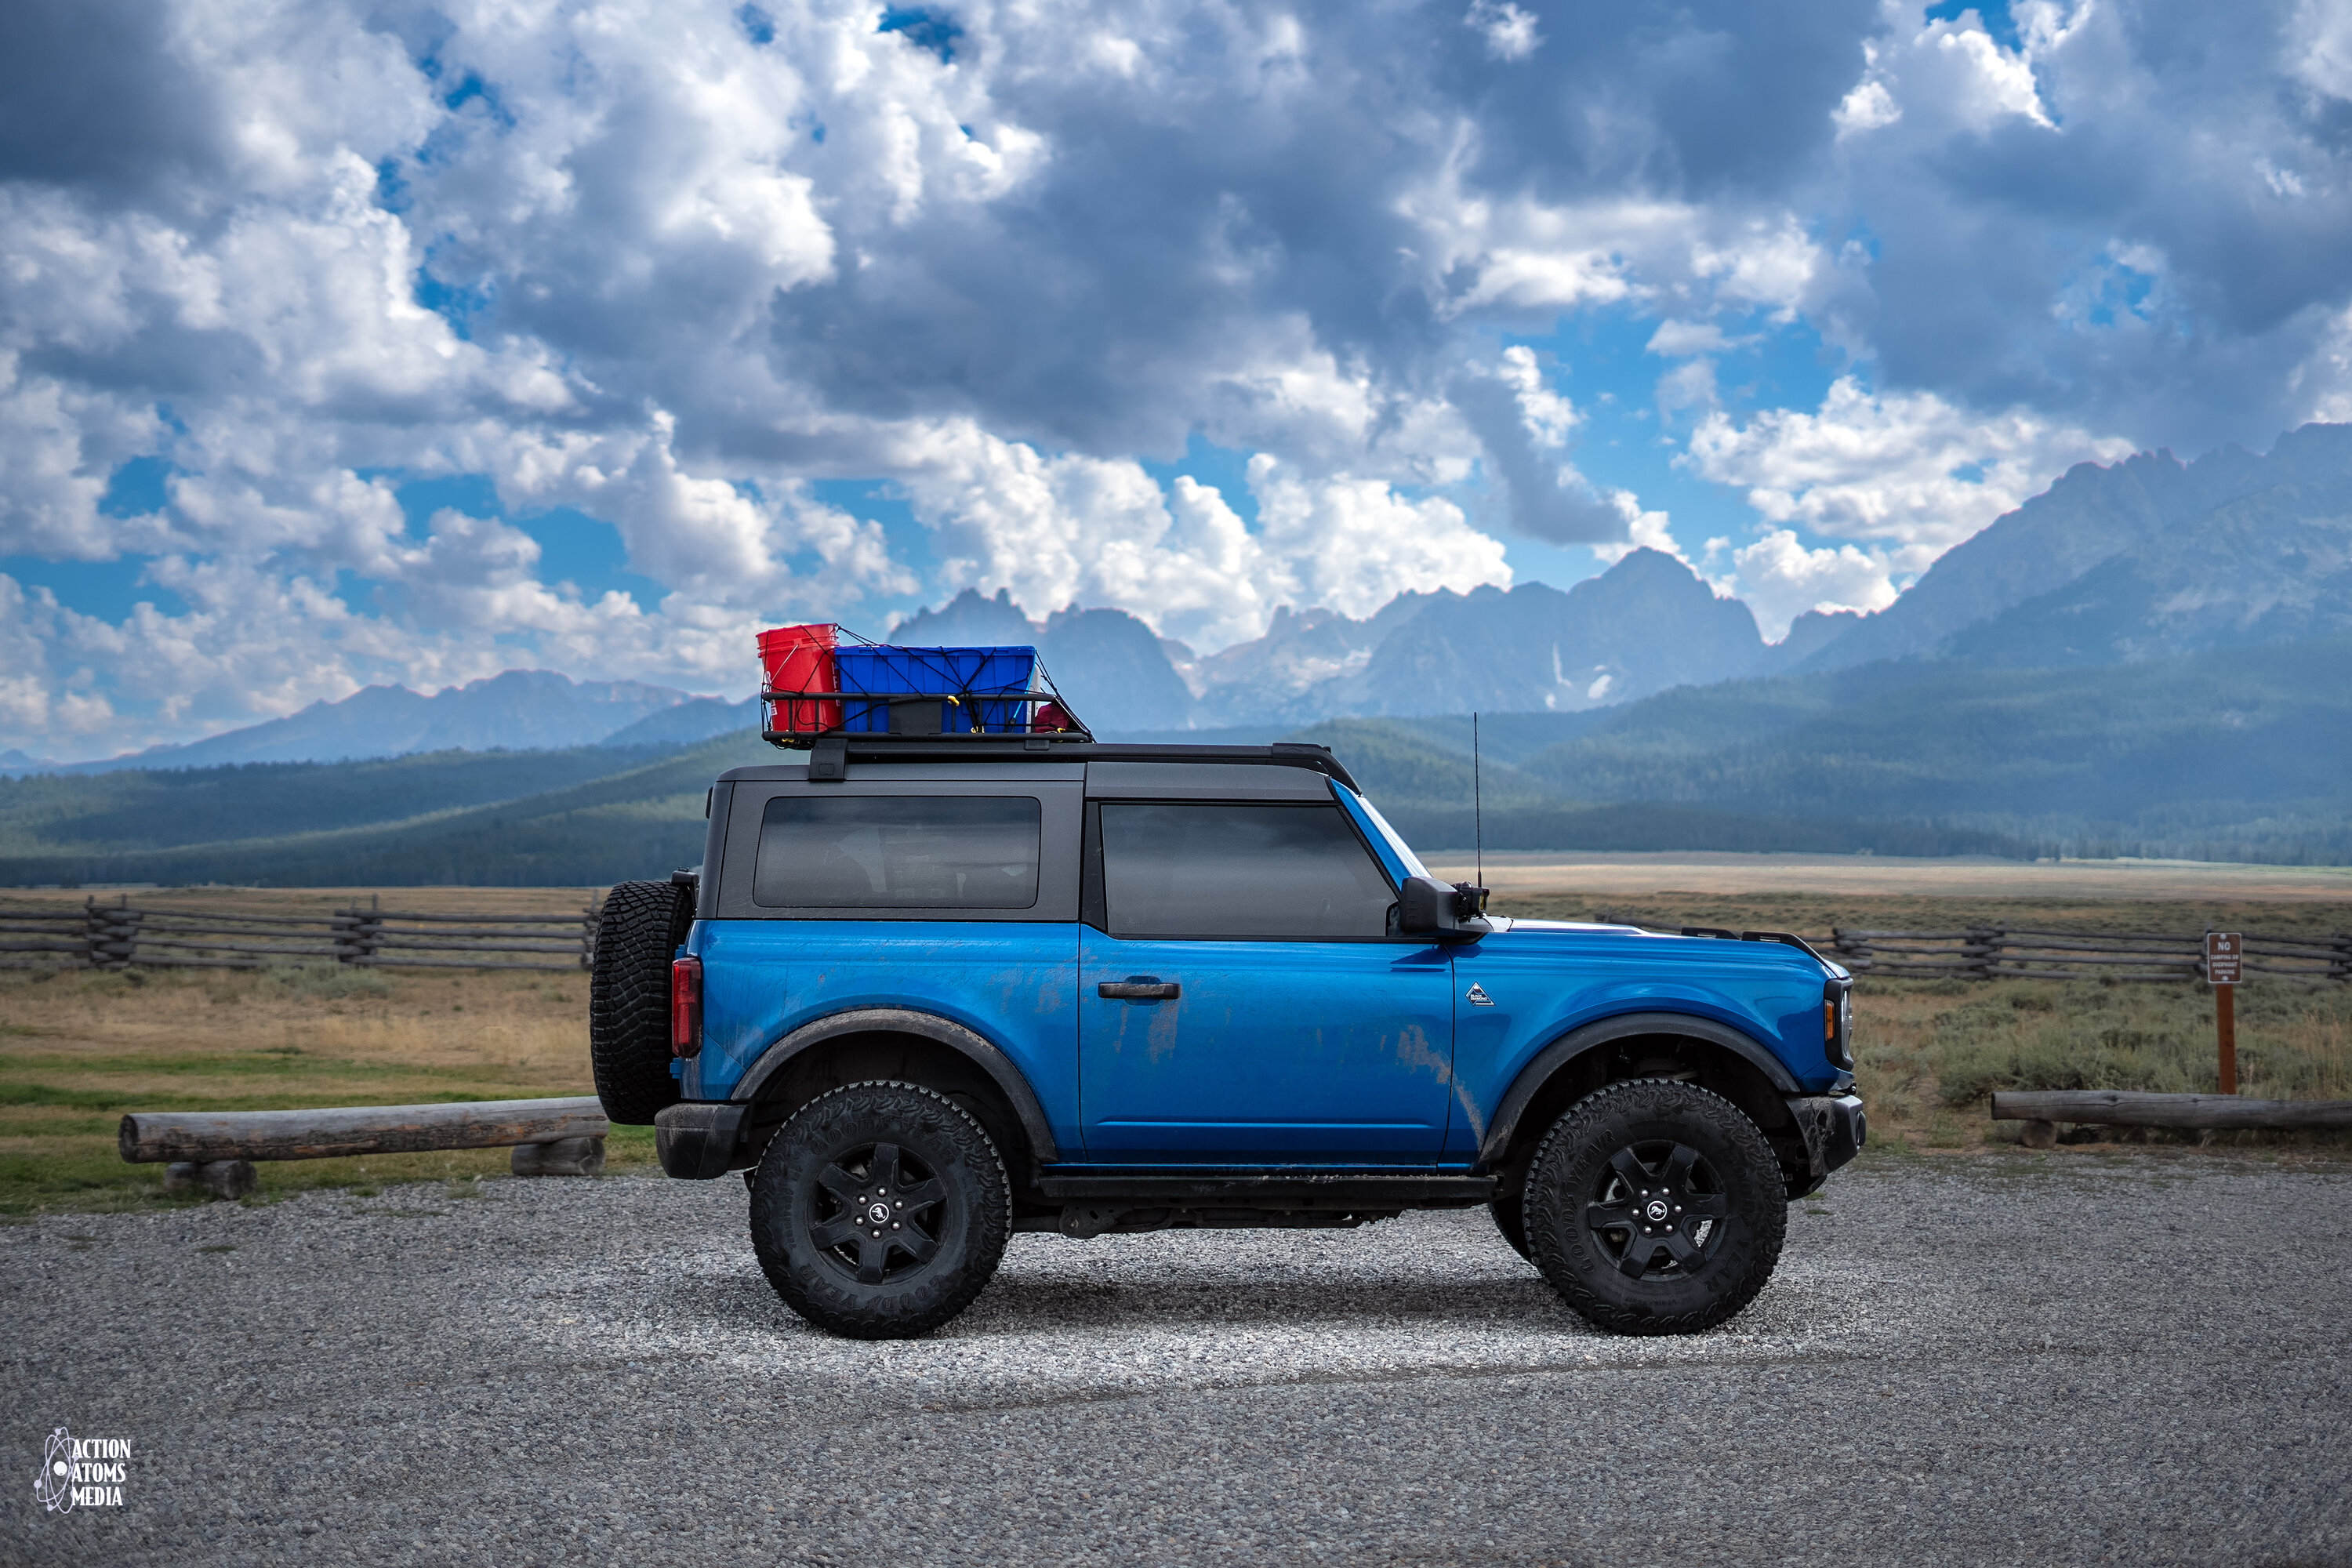 Ford Bronco 2 Door Broncos - What’s on your roof racks? [Photos Thread] Sawtooth Stewardship Recon 10